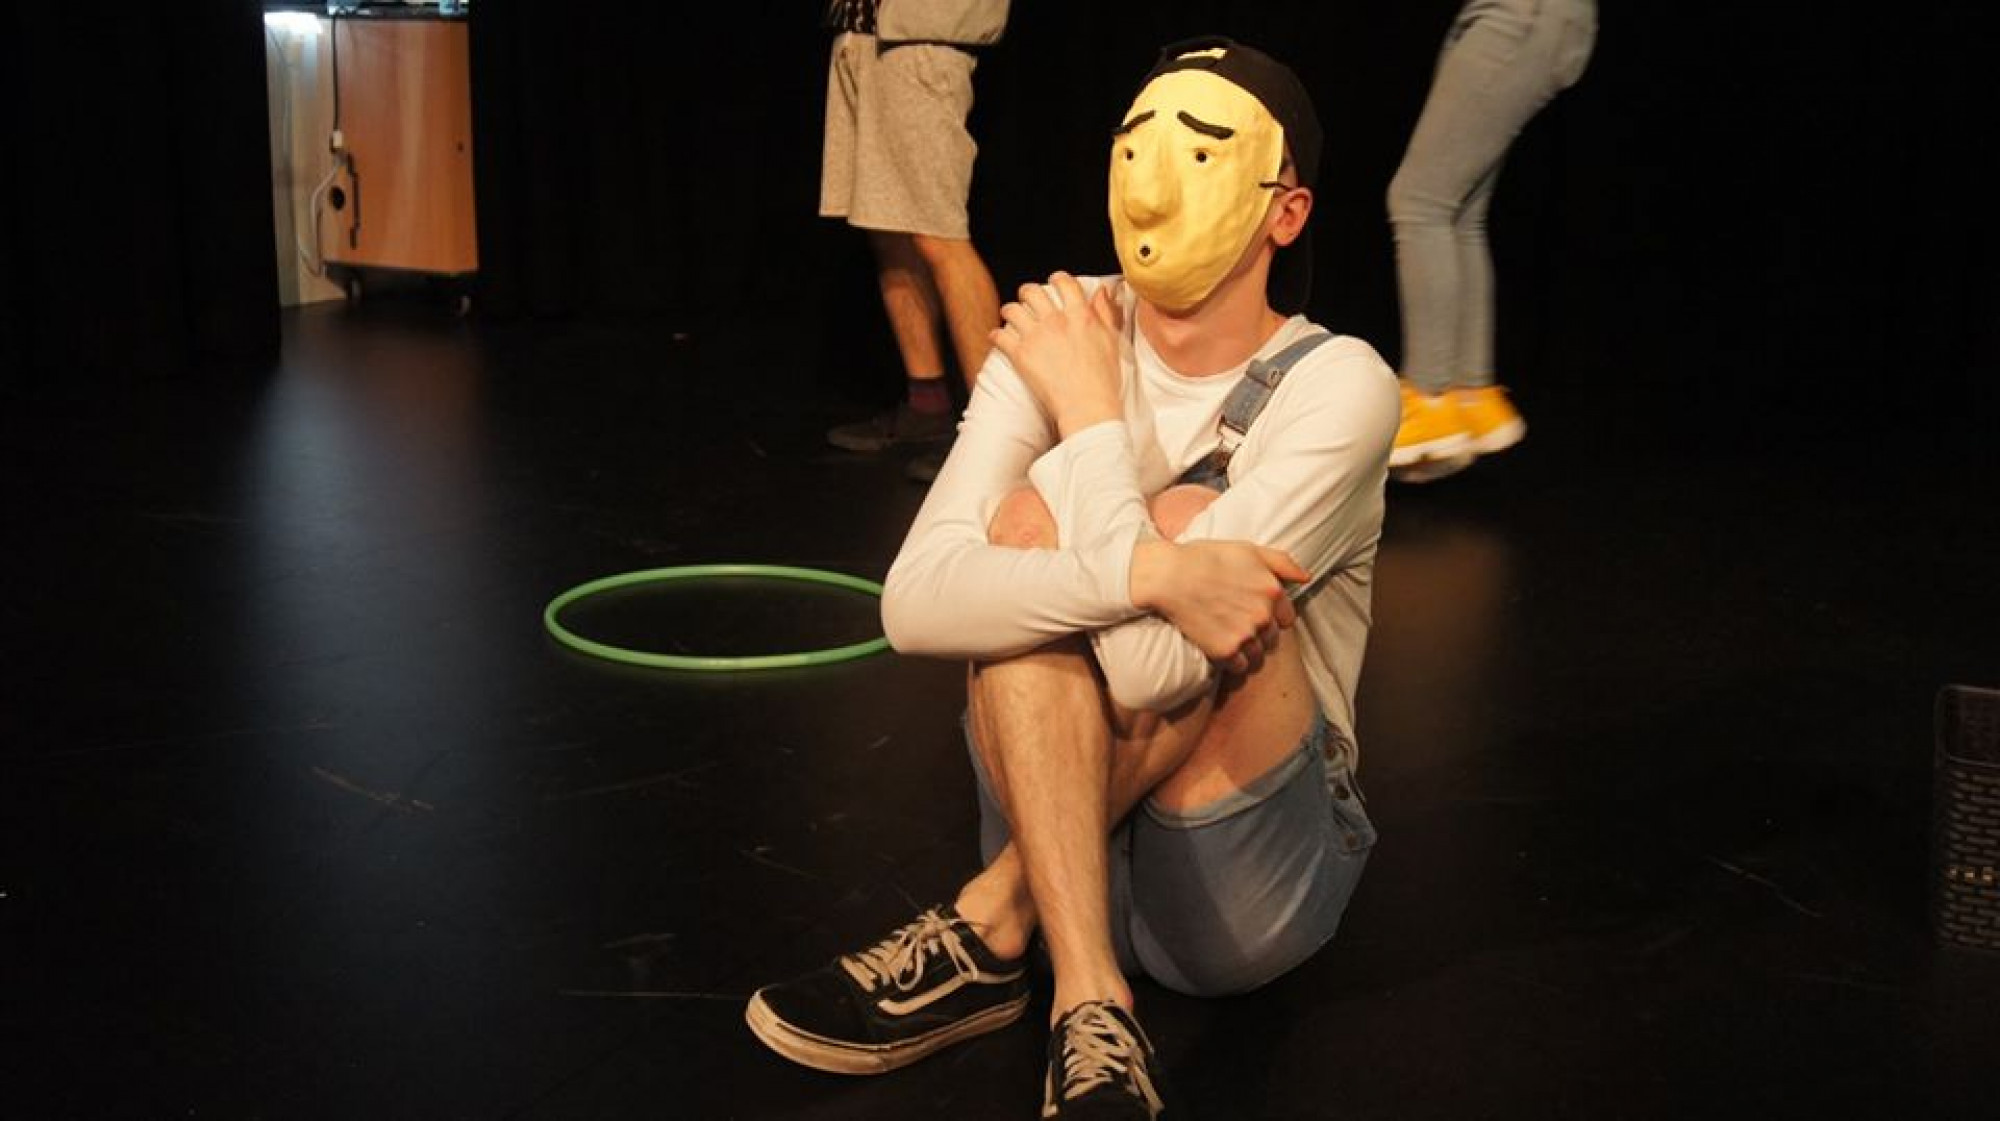 Student poses in mask